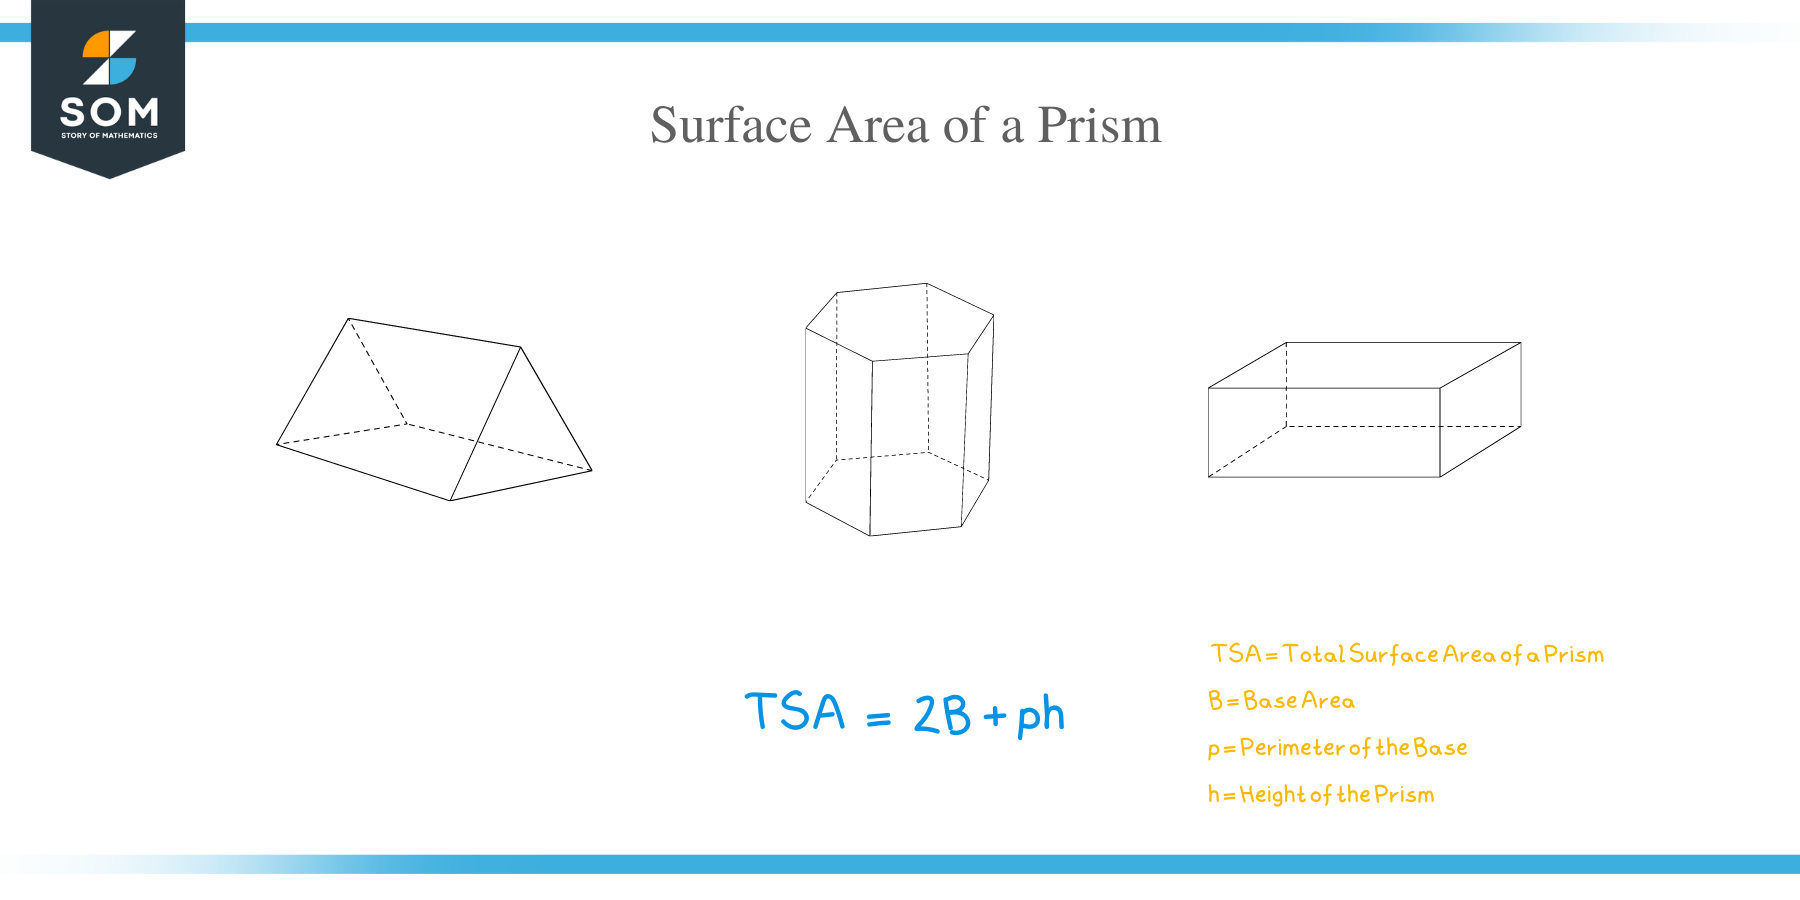 How to Find the Surface Area of a Prism?